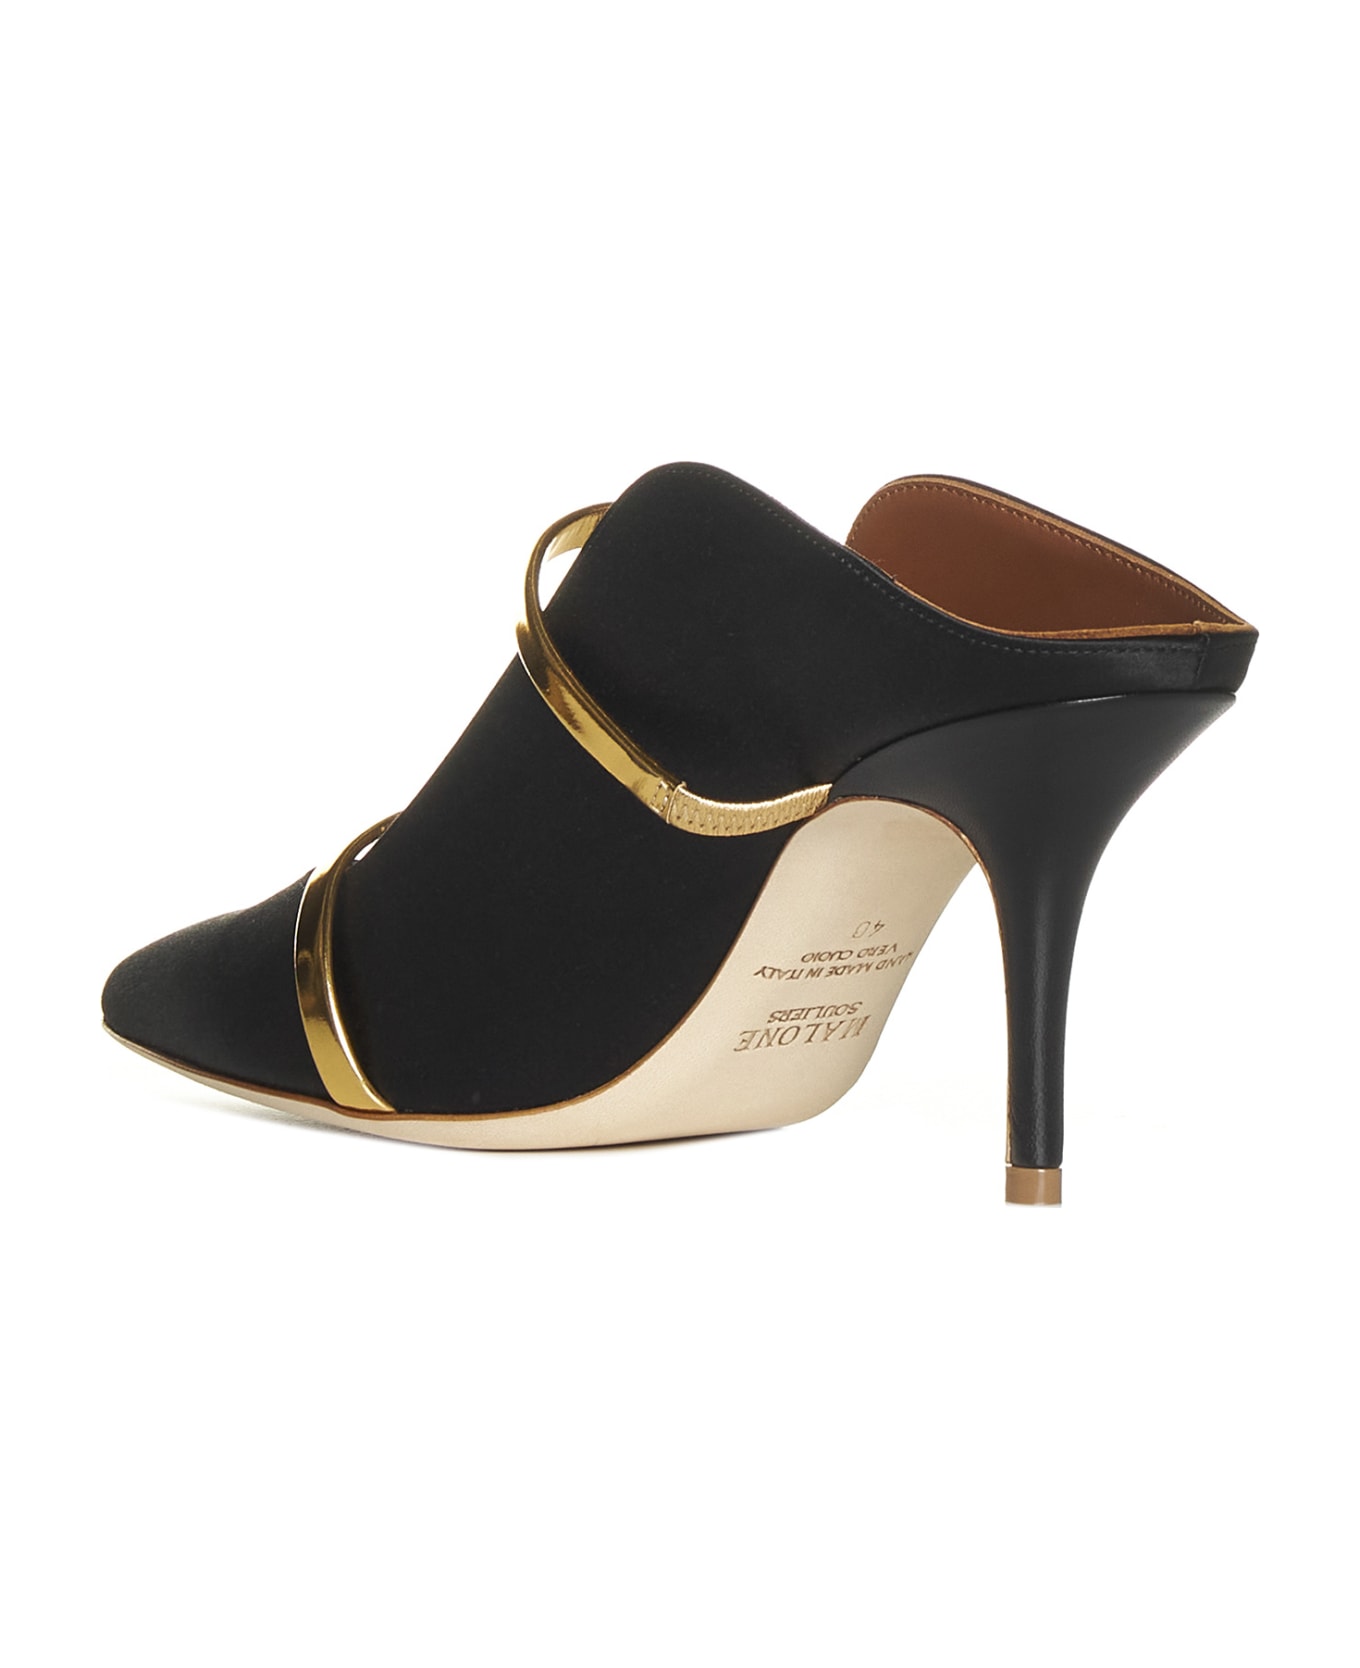 Malone Souliers Flat Shoes - Black/gold blk